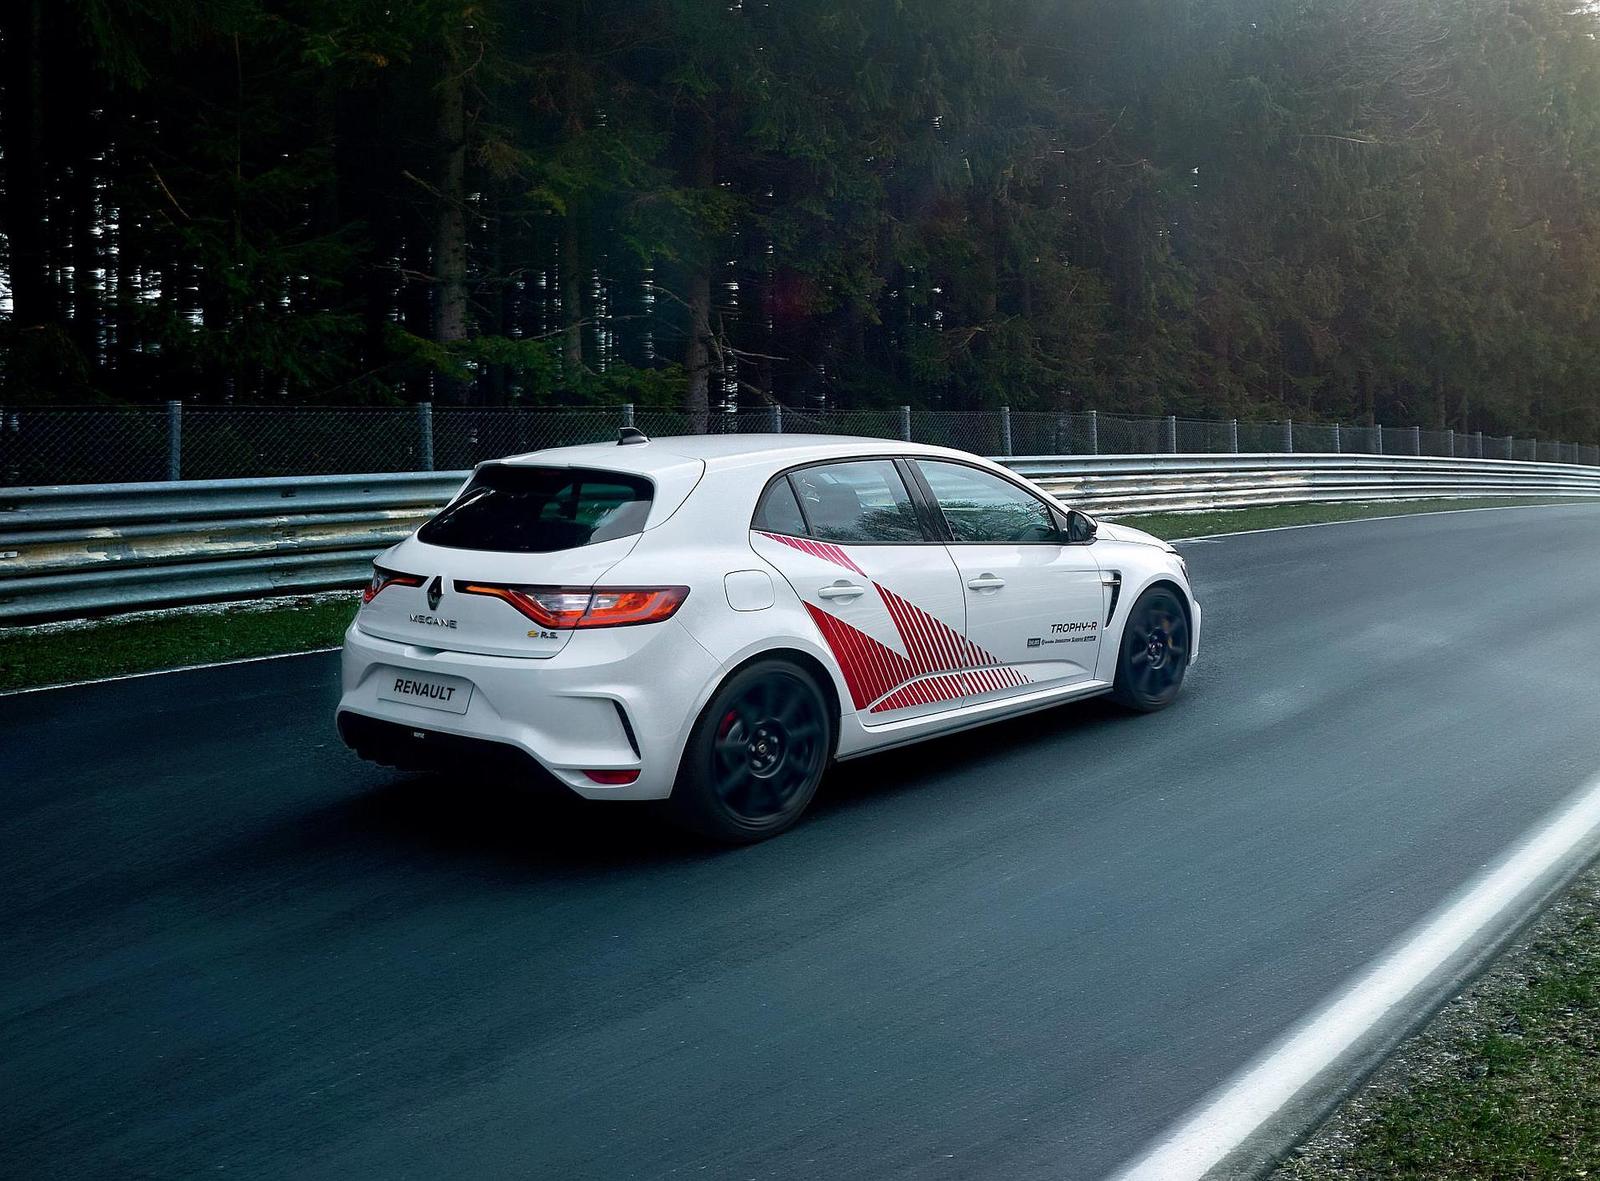 New Mégane R.S. Trophy-R fastest ever front-wheel-drive production car at the Nürburgring EMBARGO 14h00 210519 (3)